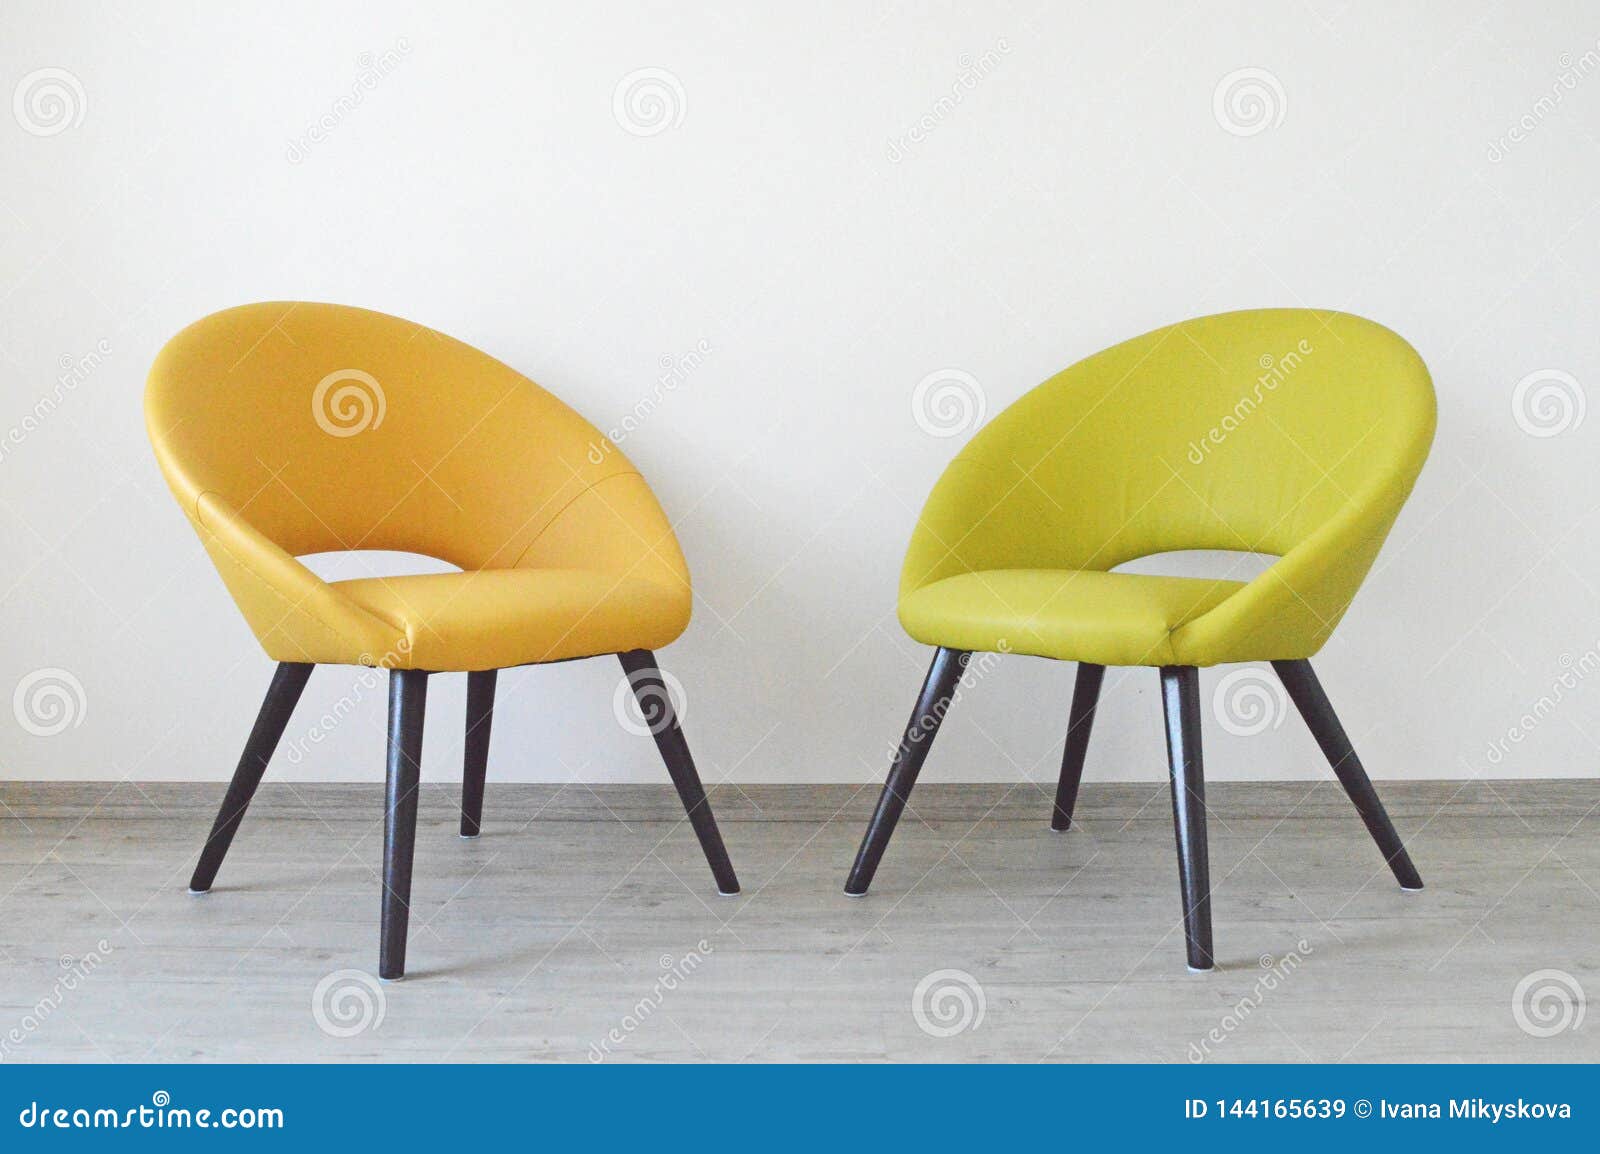 Refurbished Chairs Stock Image Image Of Color Home 144165639